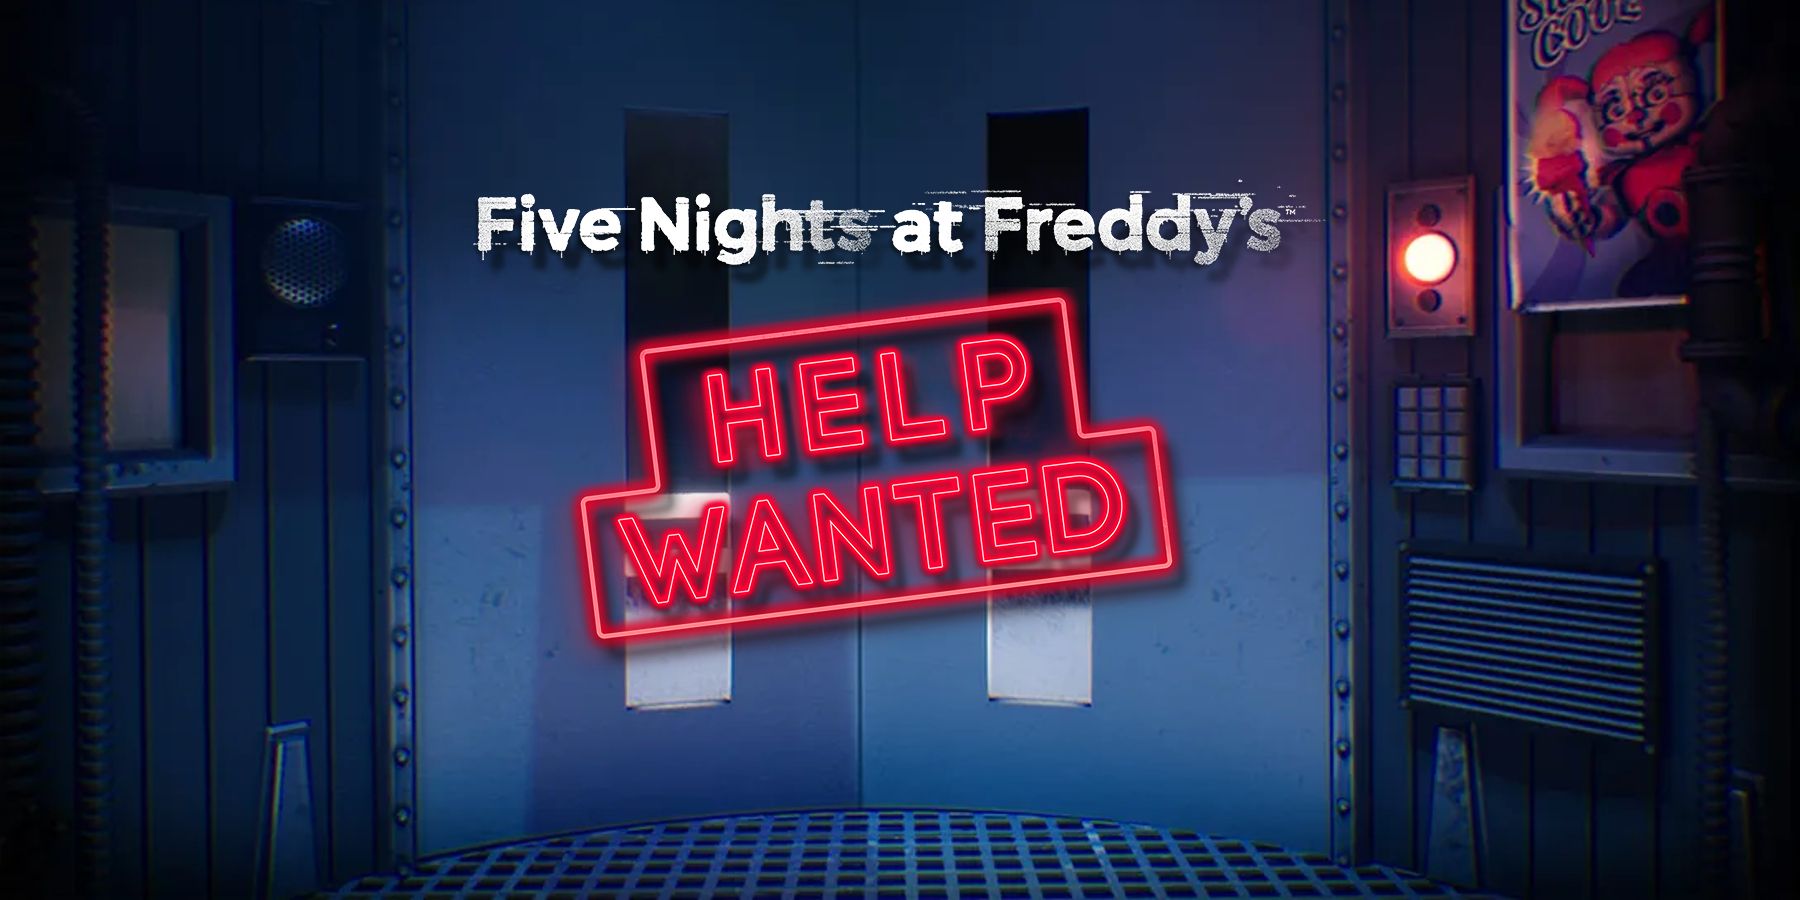 Five Nights at Freddy's: Help Wanted Coming to More Platforms This Year